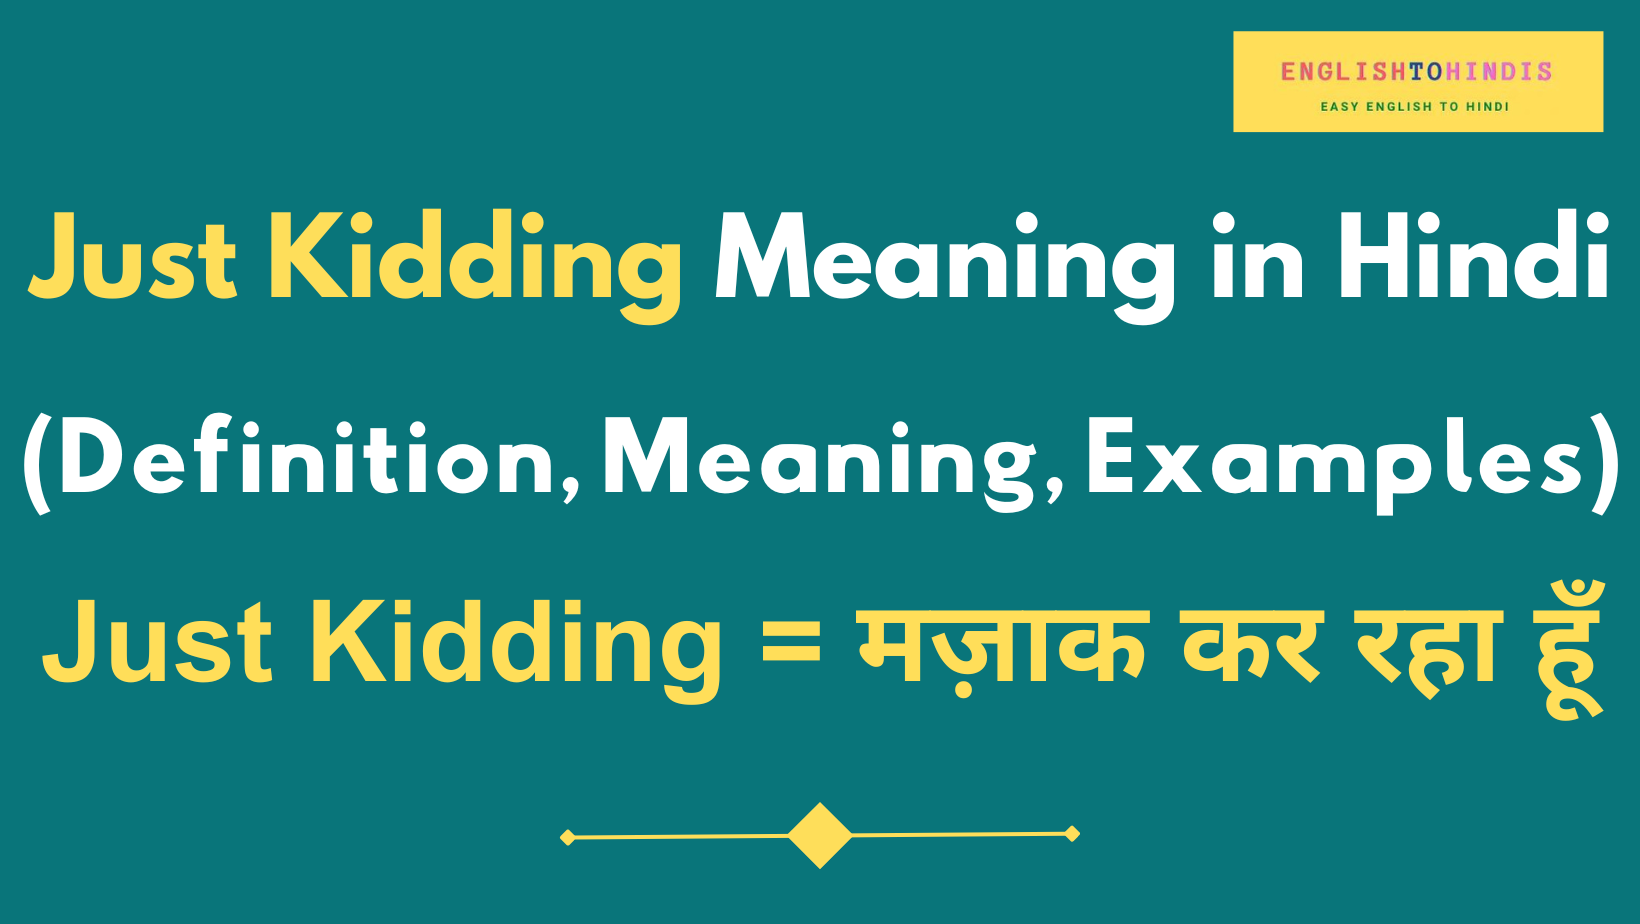 Just Kidding Meaning in Hindi